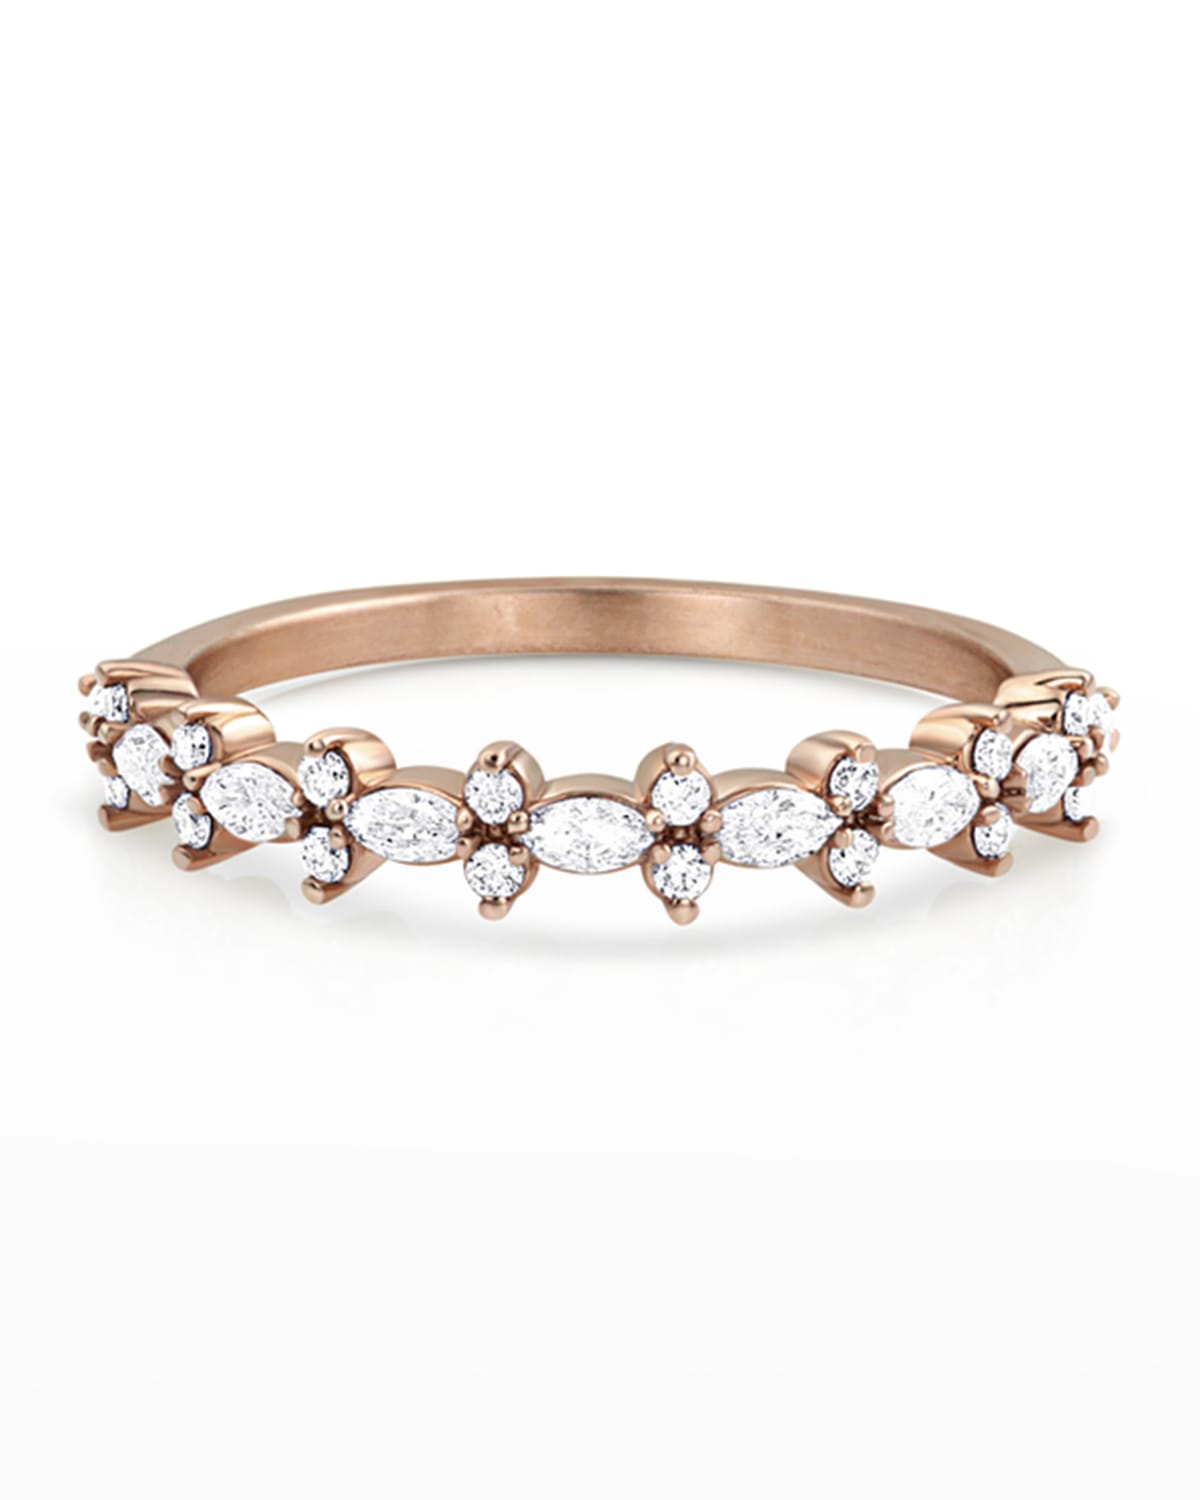 Dominique Cohen 18k Rose Gold Diamond Crown Stack Ring, Size 7